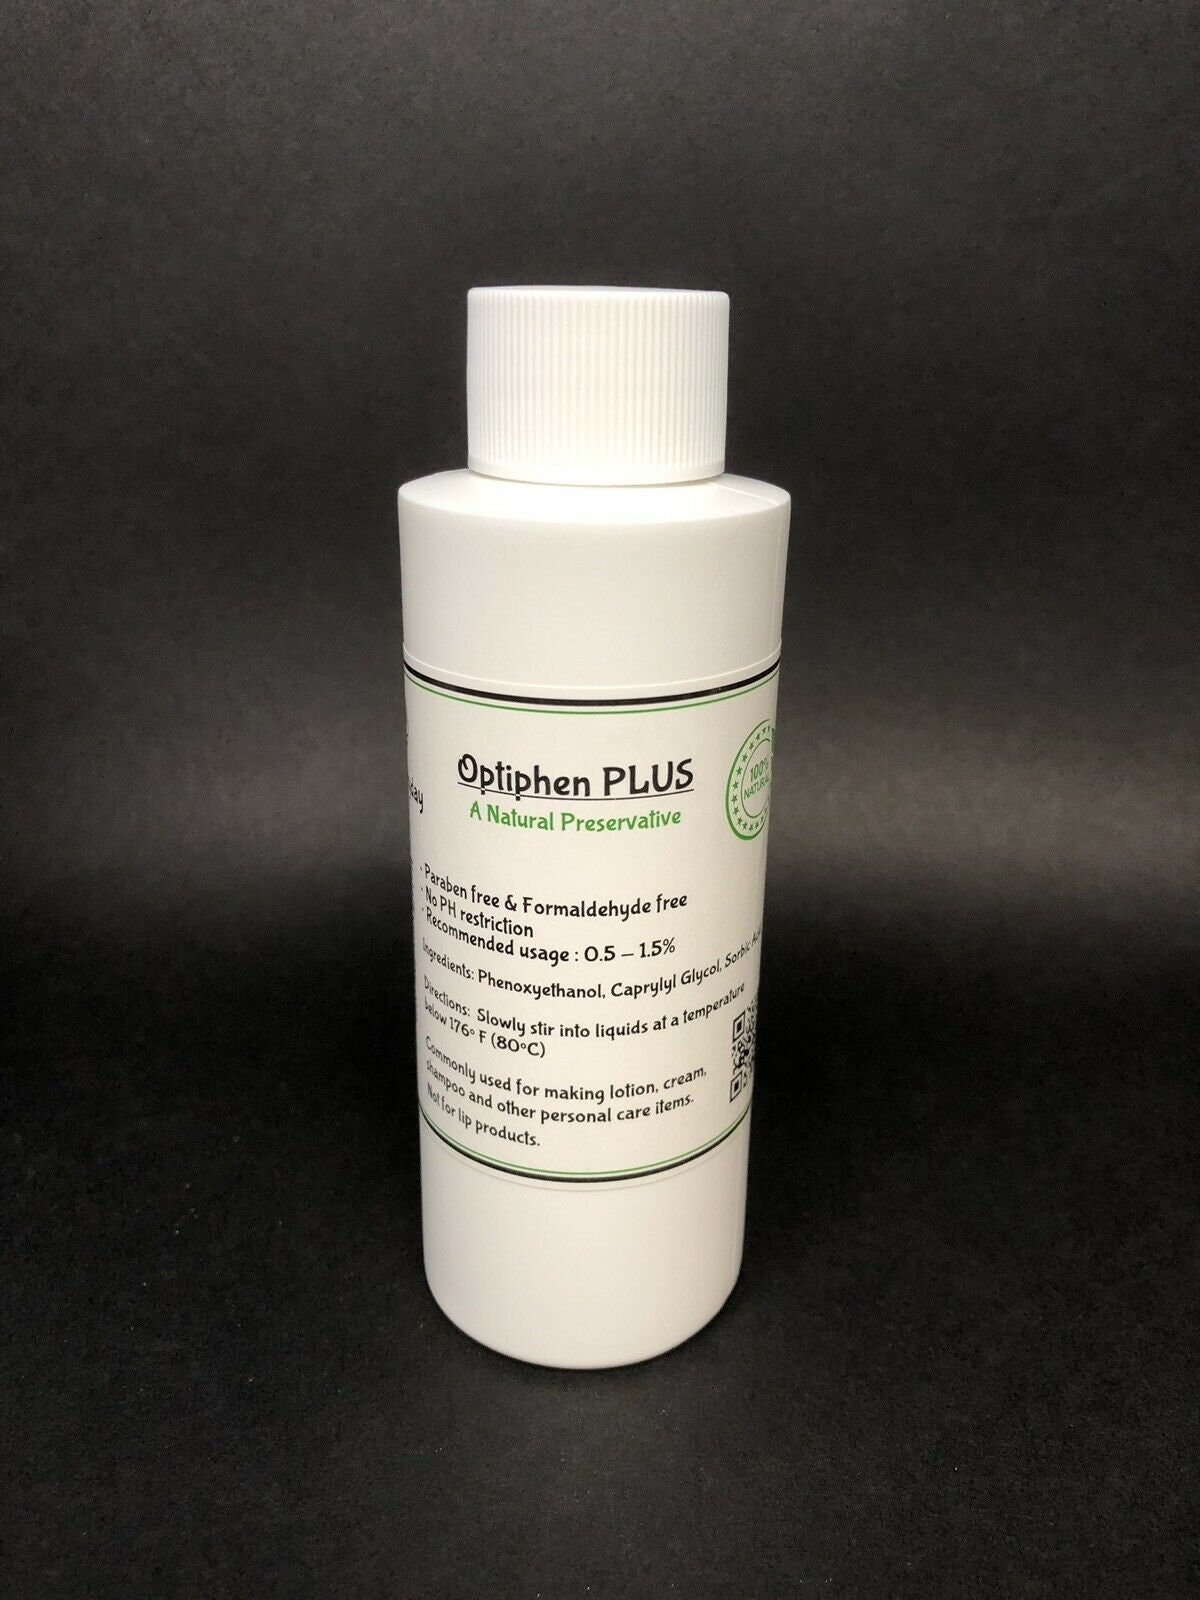 Optiphen Plus Brochure - Lotioncrafter